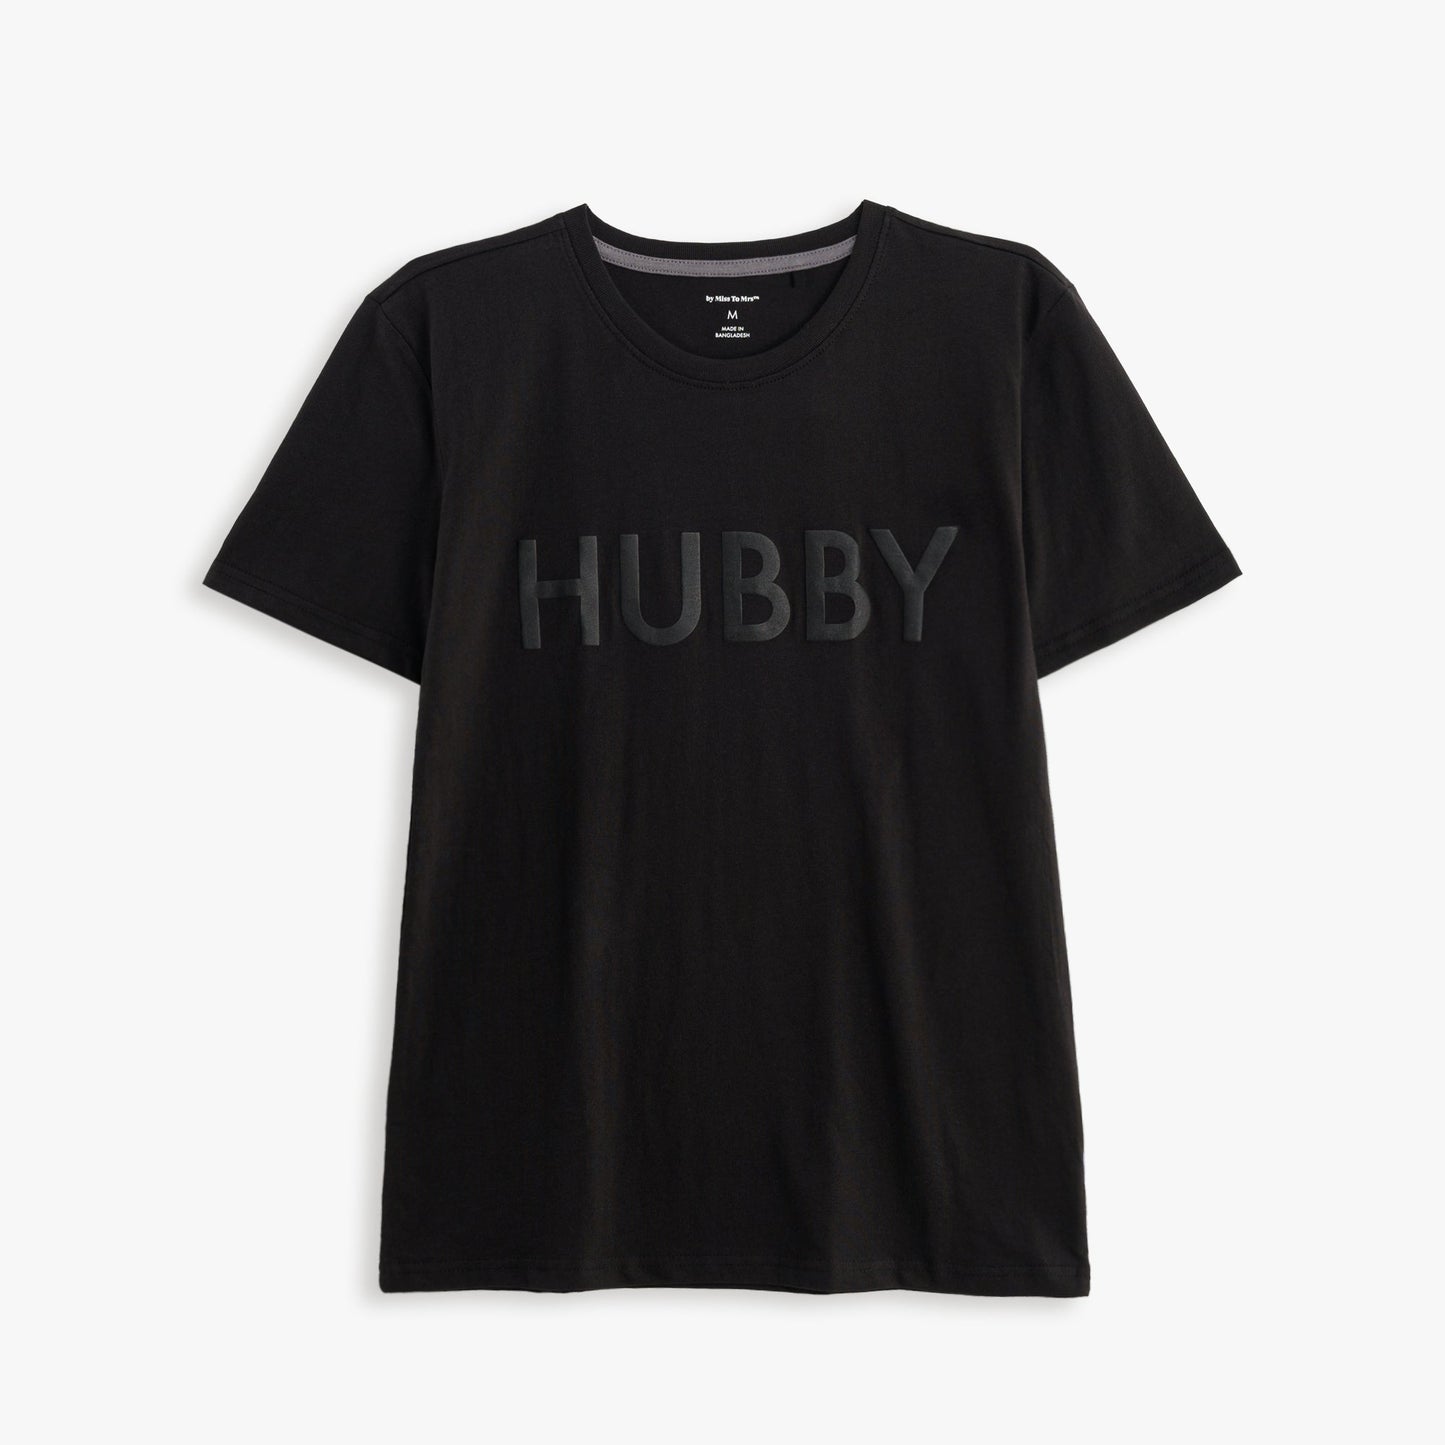 Hubby and Wifey Puff Print T-shirt Set